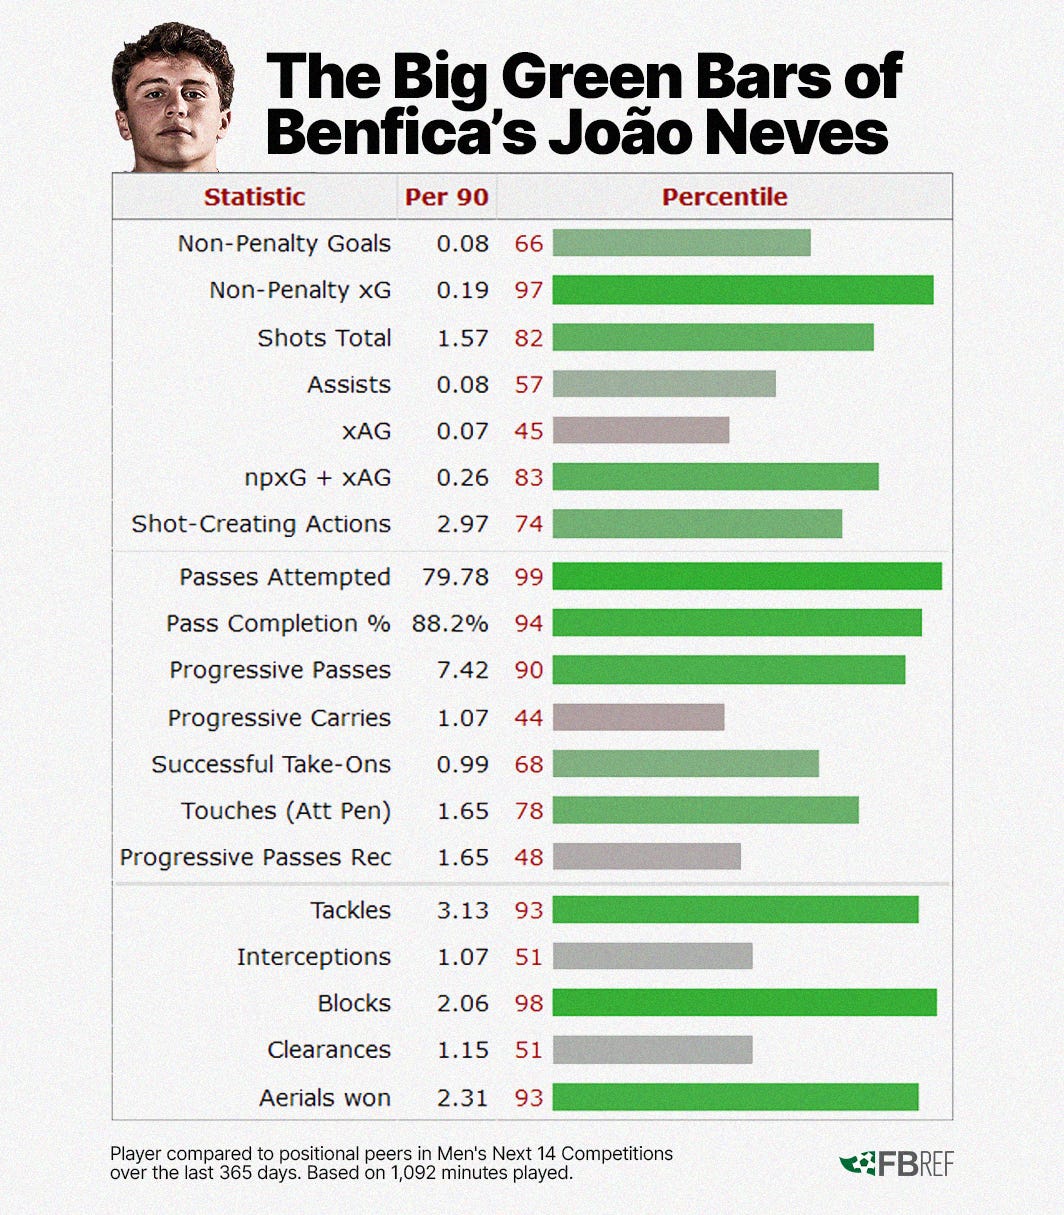 A graphic featuring the title "The Big Green Bars of Benfica's João Neves". Beside it as a cutout photo of Neves, and underneath it is his FBRef scouting report showing his percentile rankings for a number of metrics